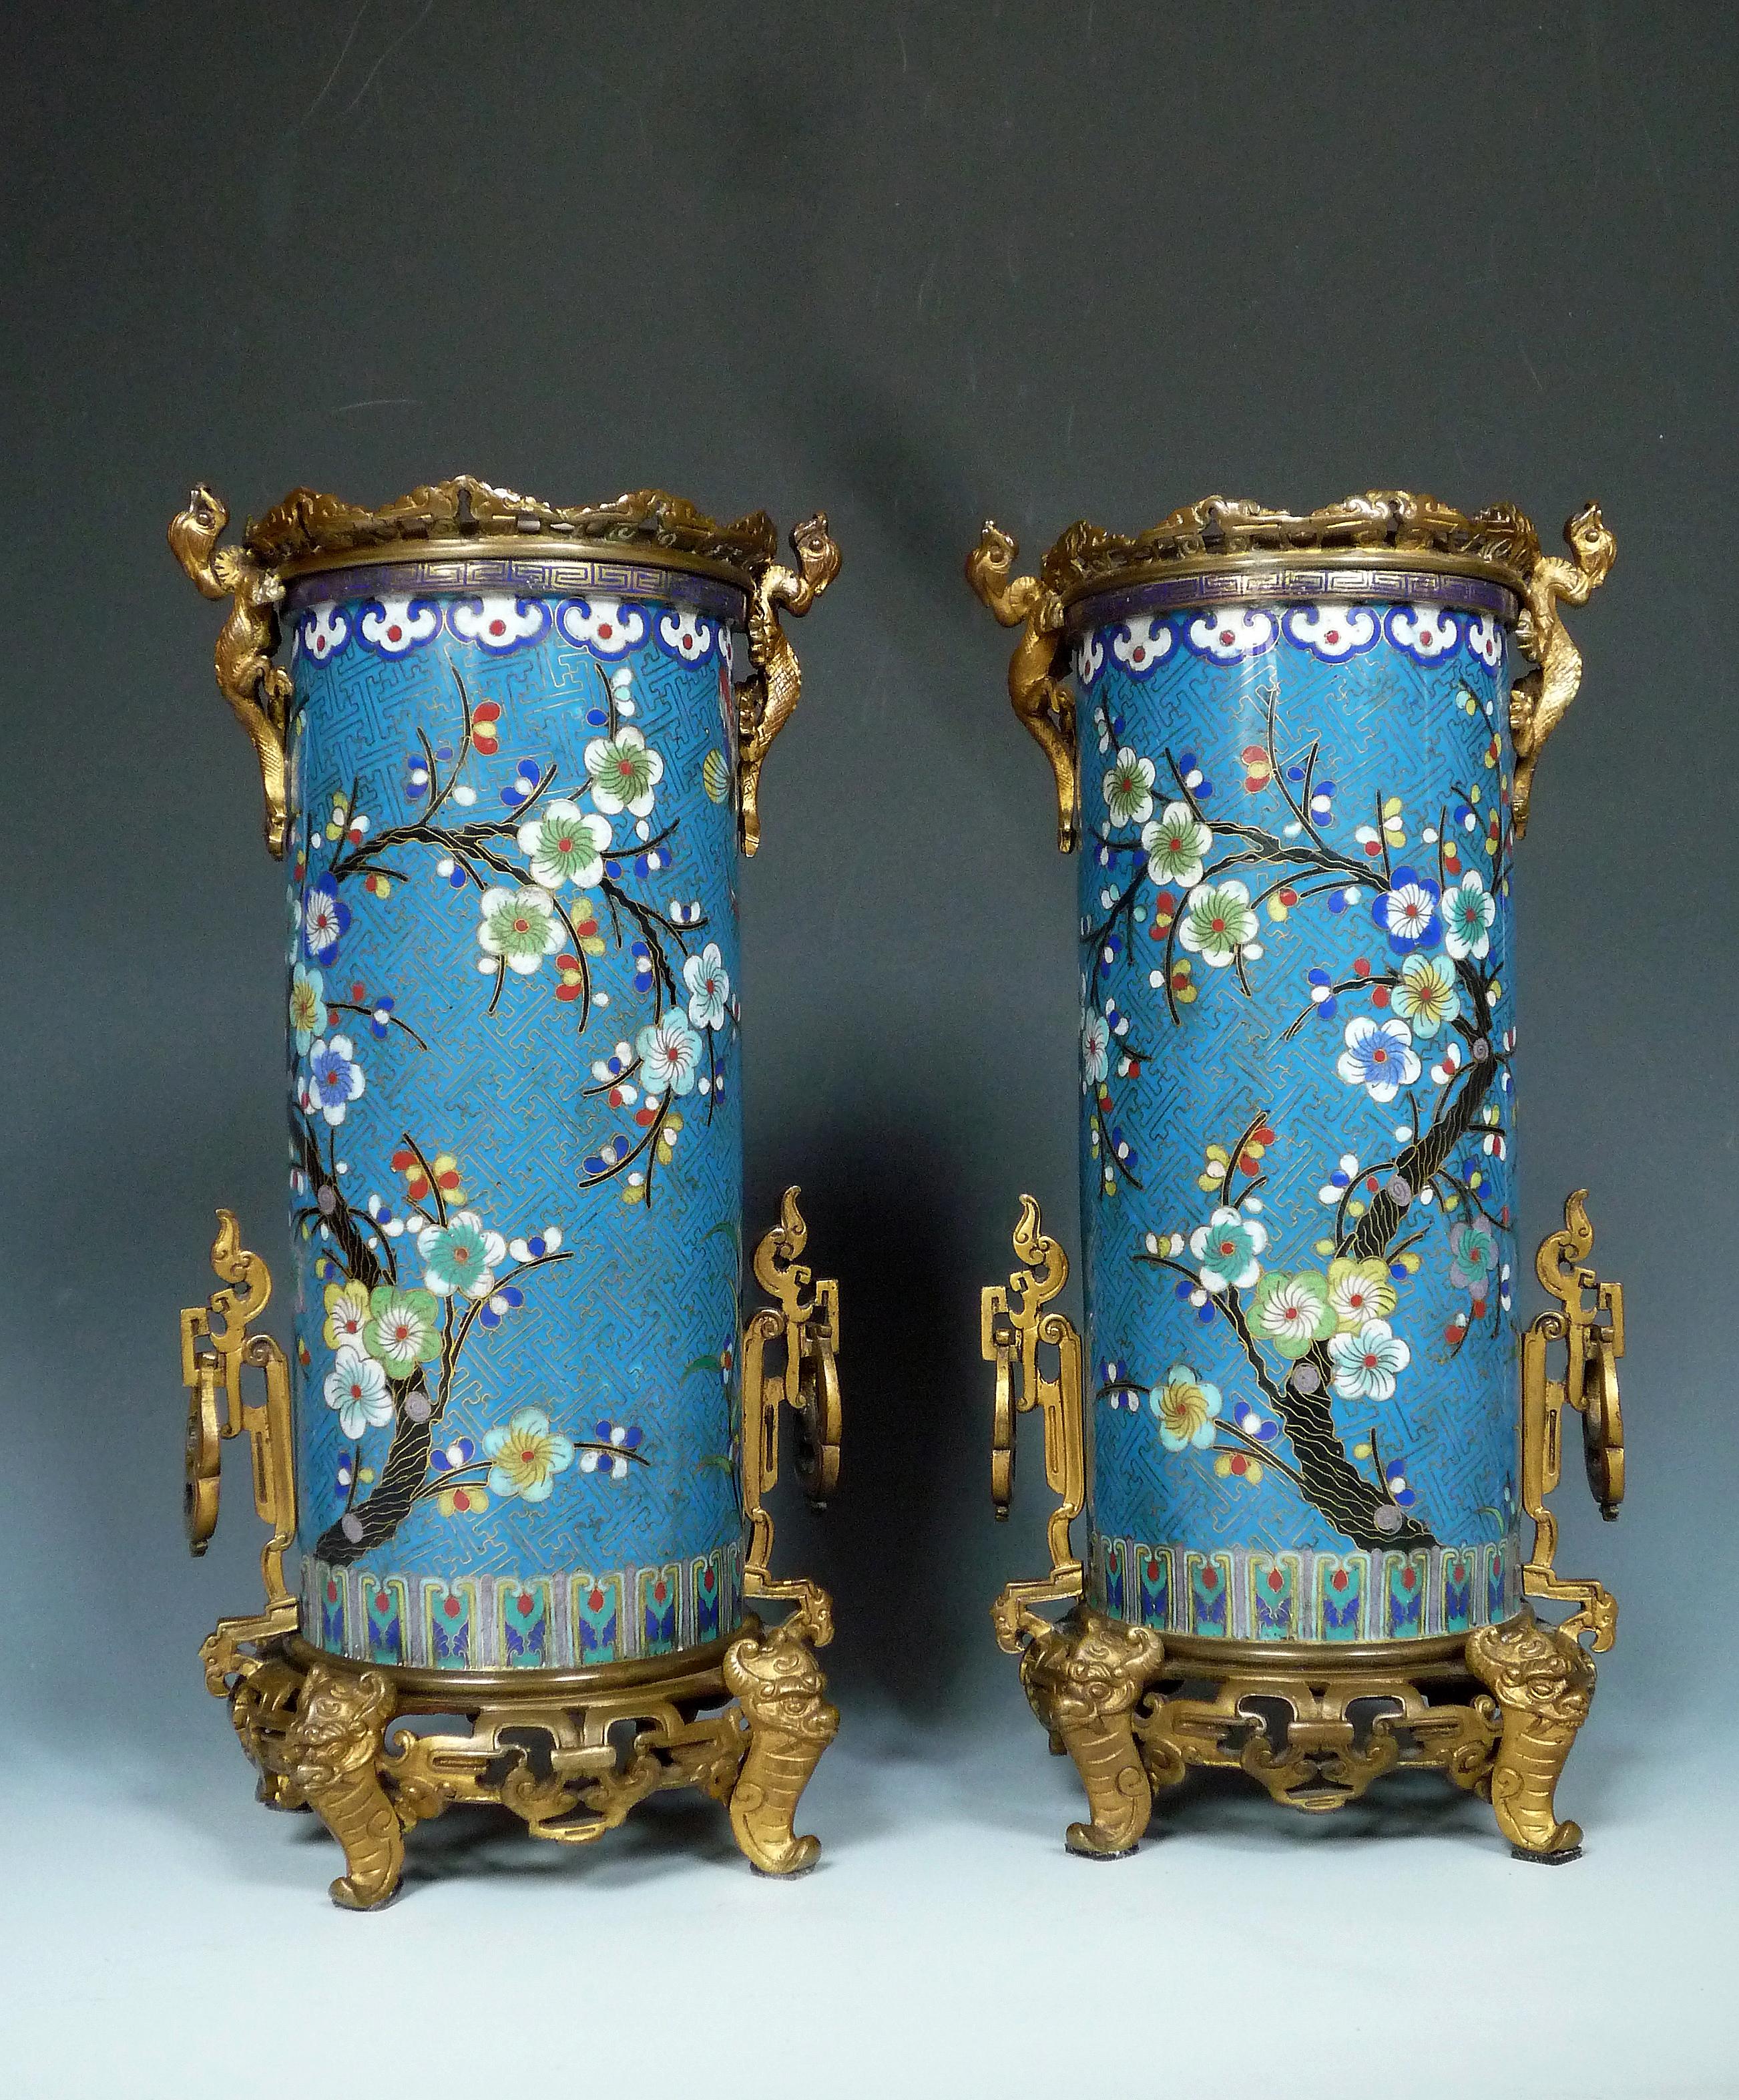 Pair of Japanese-style roll-shaped vases, made in “cloisonné” enamel and gilded bronze. The cylindrical body is decorated with polychrom floral branches, flowers and butterflies on a blue background. The mounts made in pierced and “old gold”